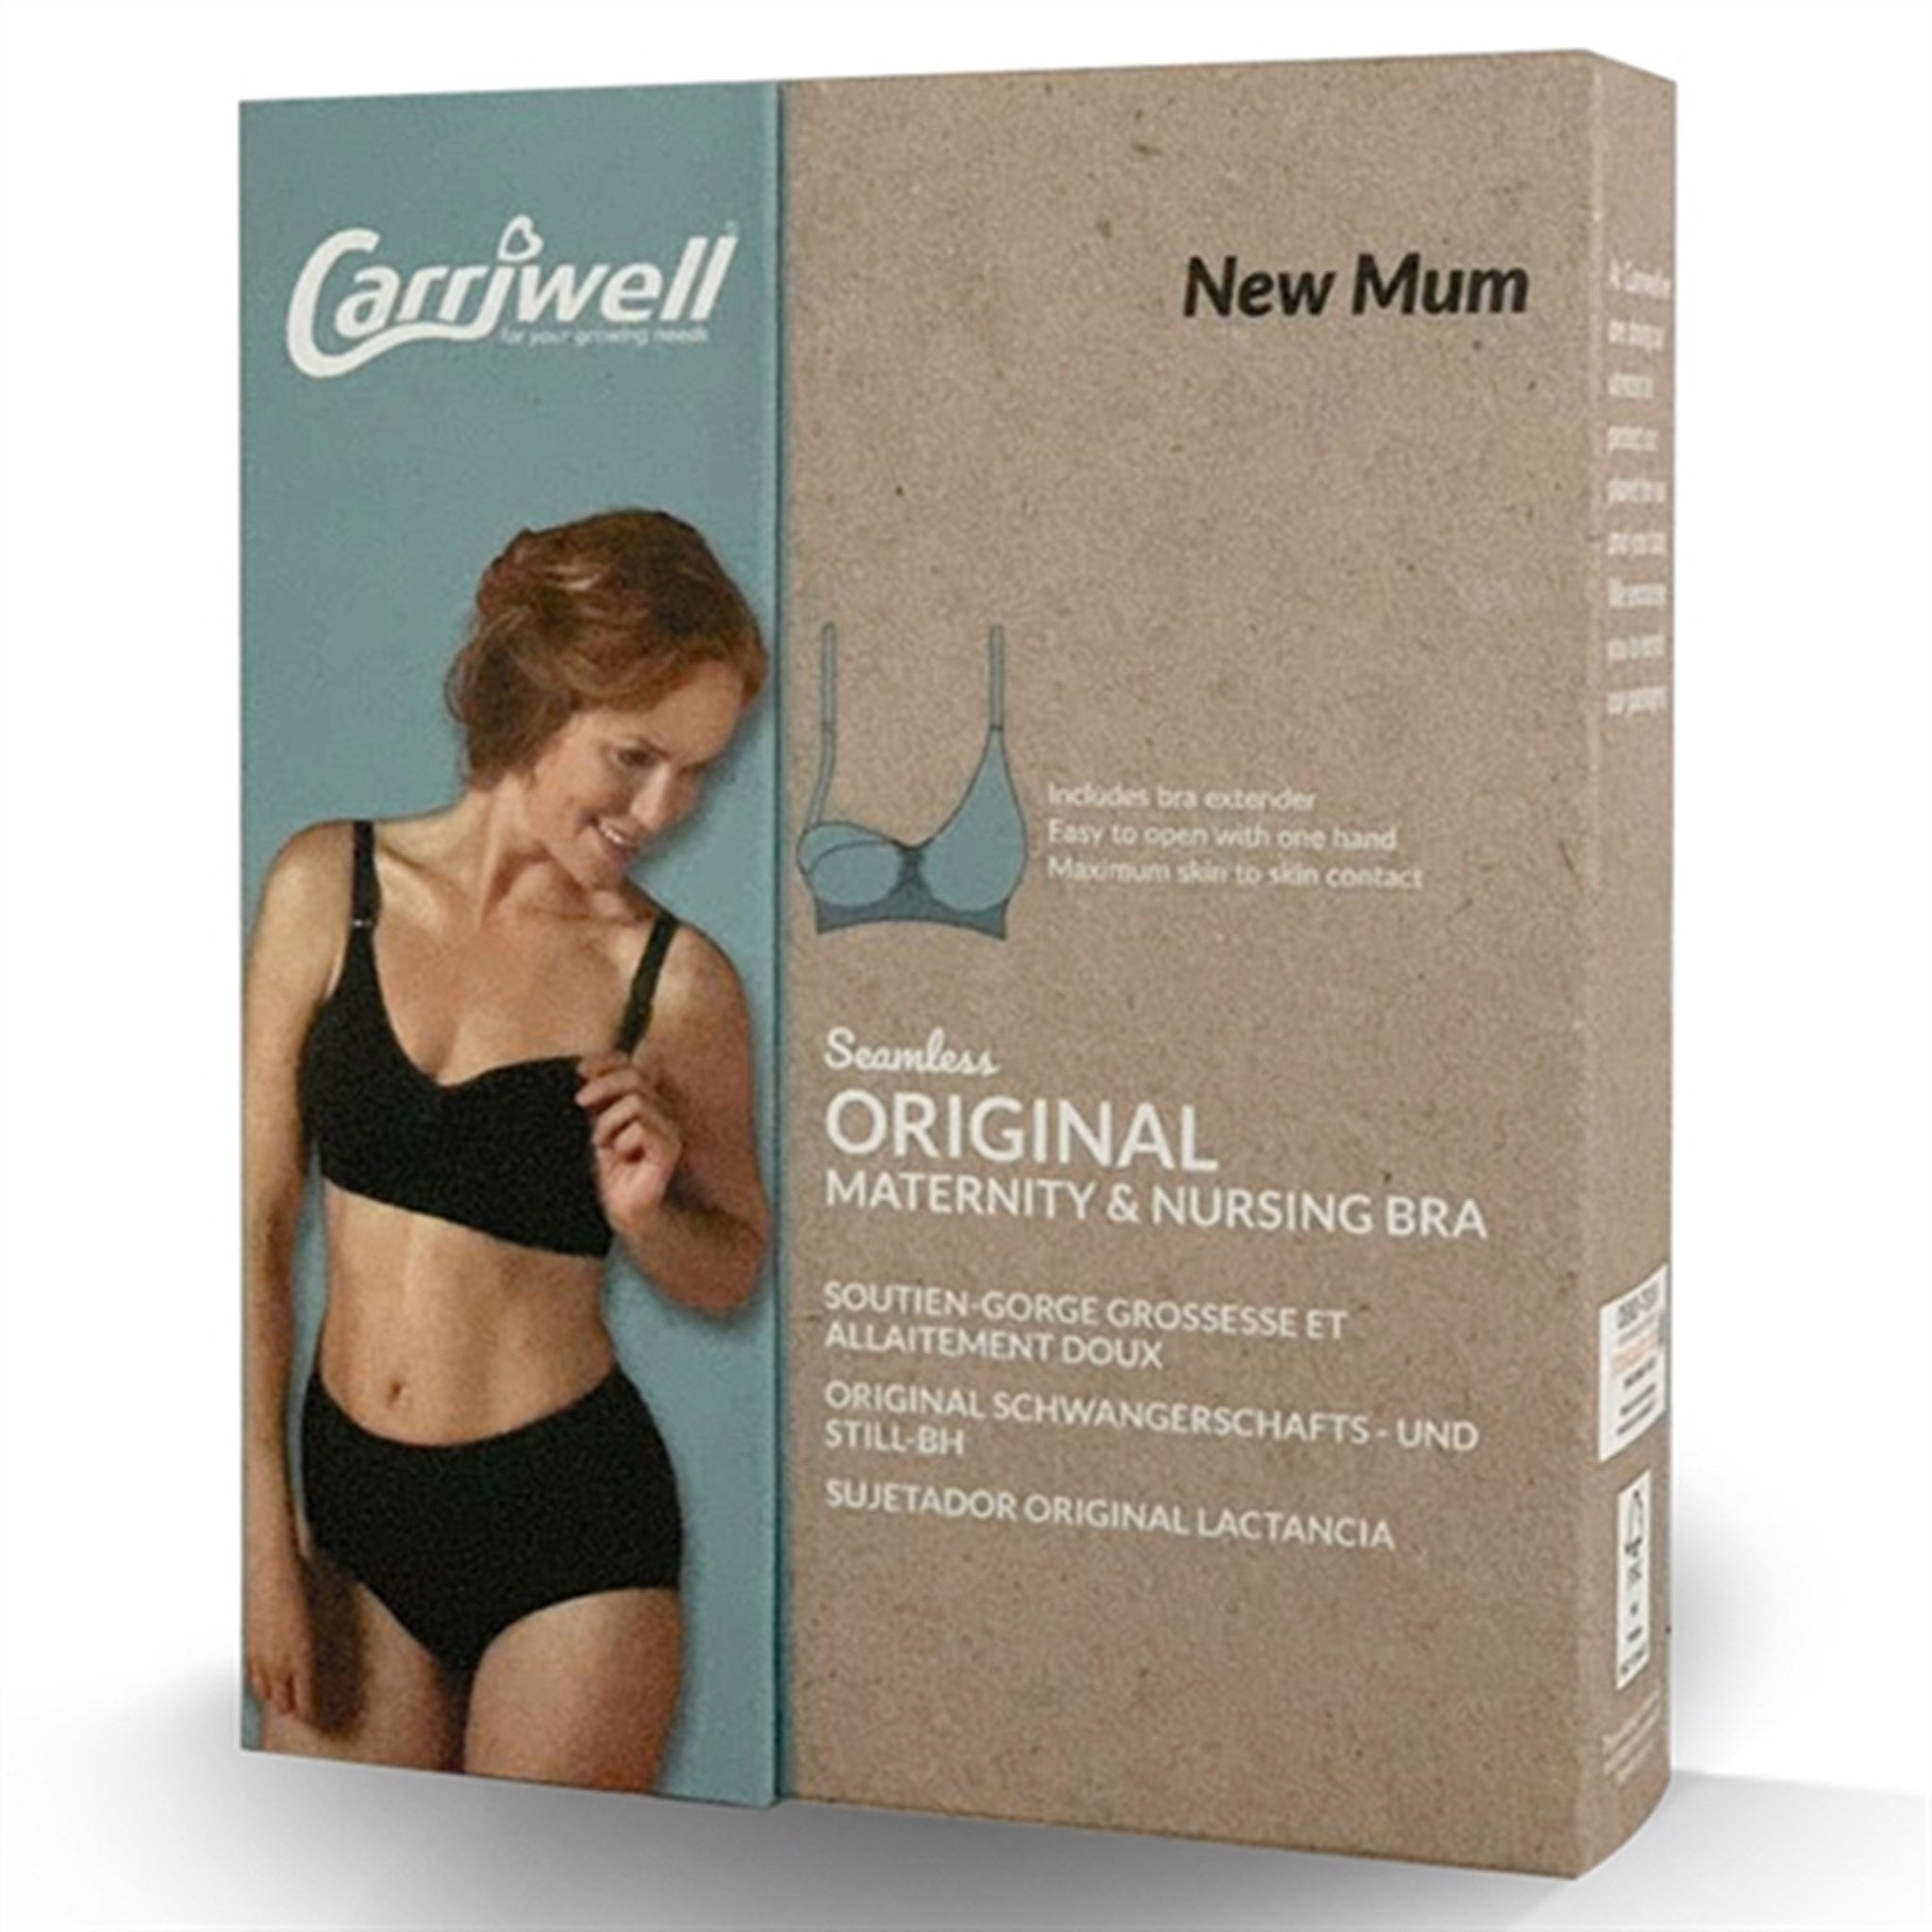 Carriwell Carriwell Maternity And Nursing Bra White 6